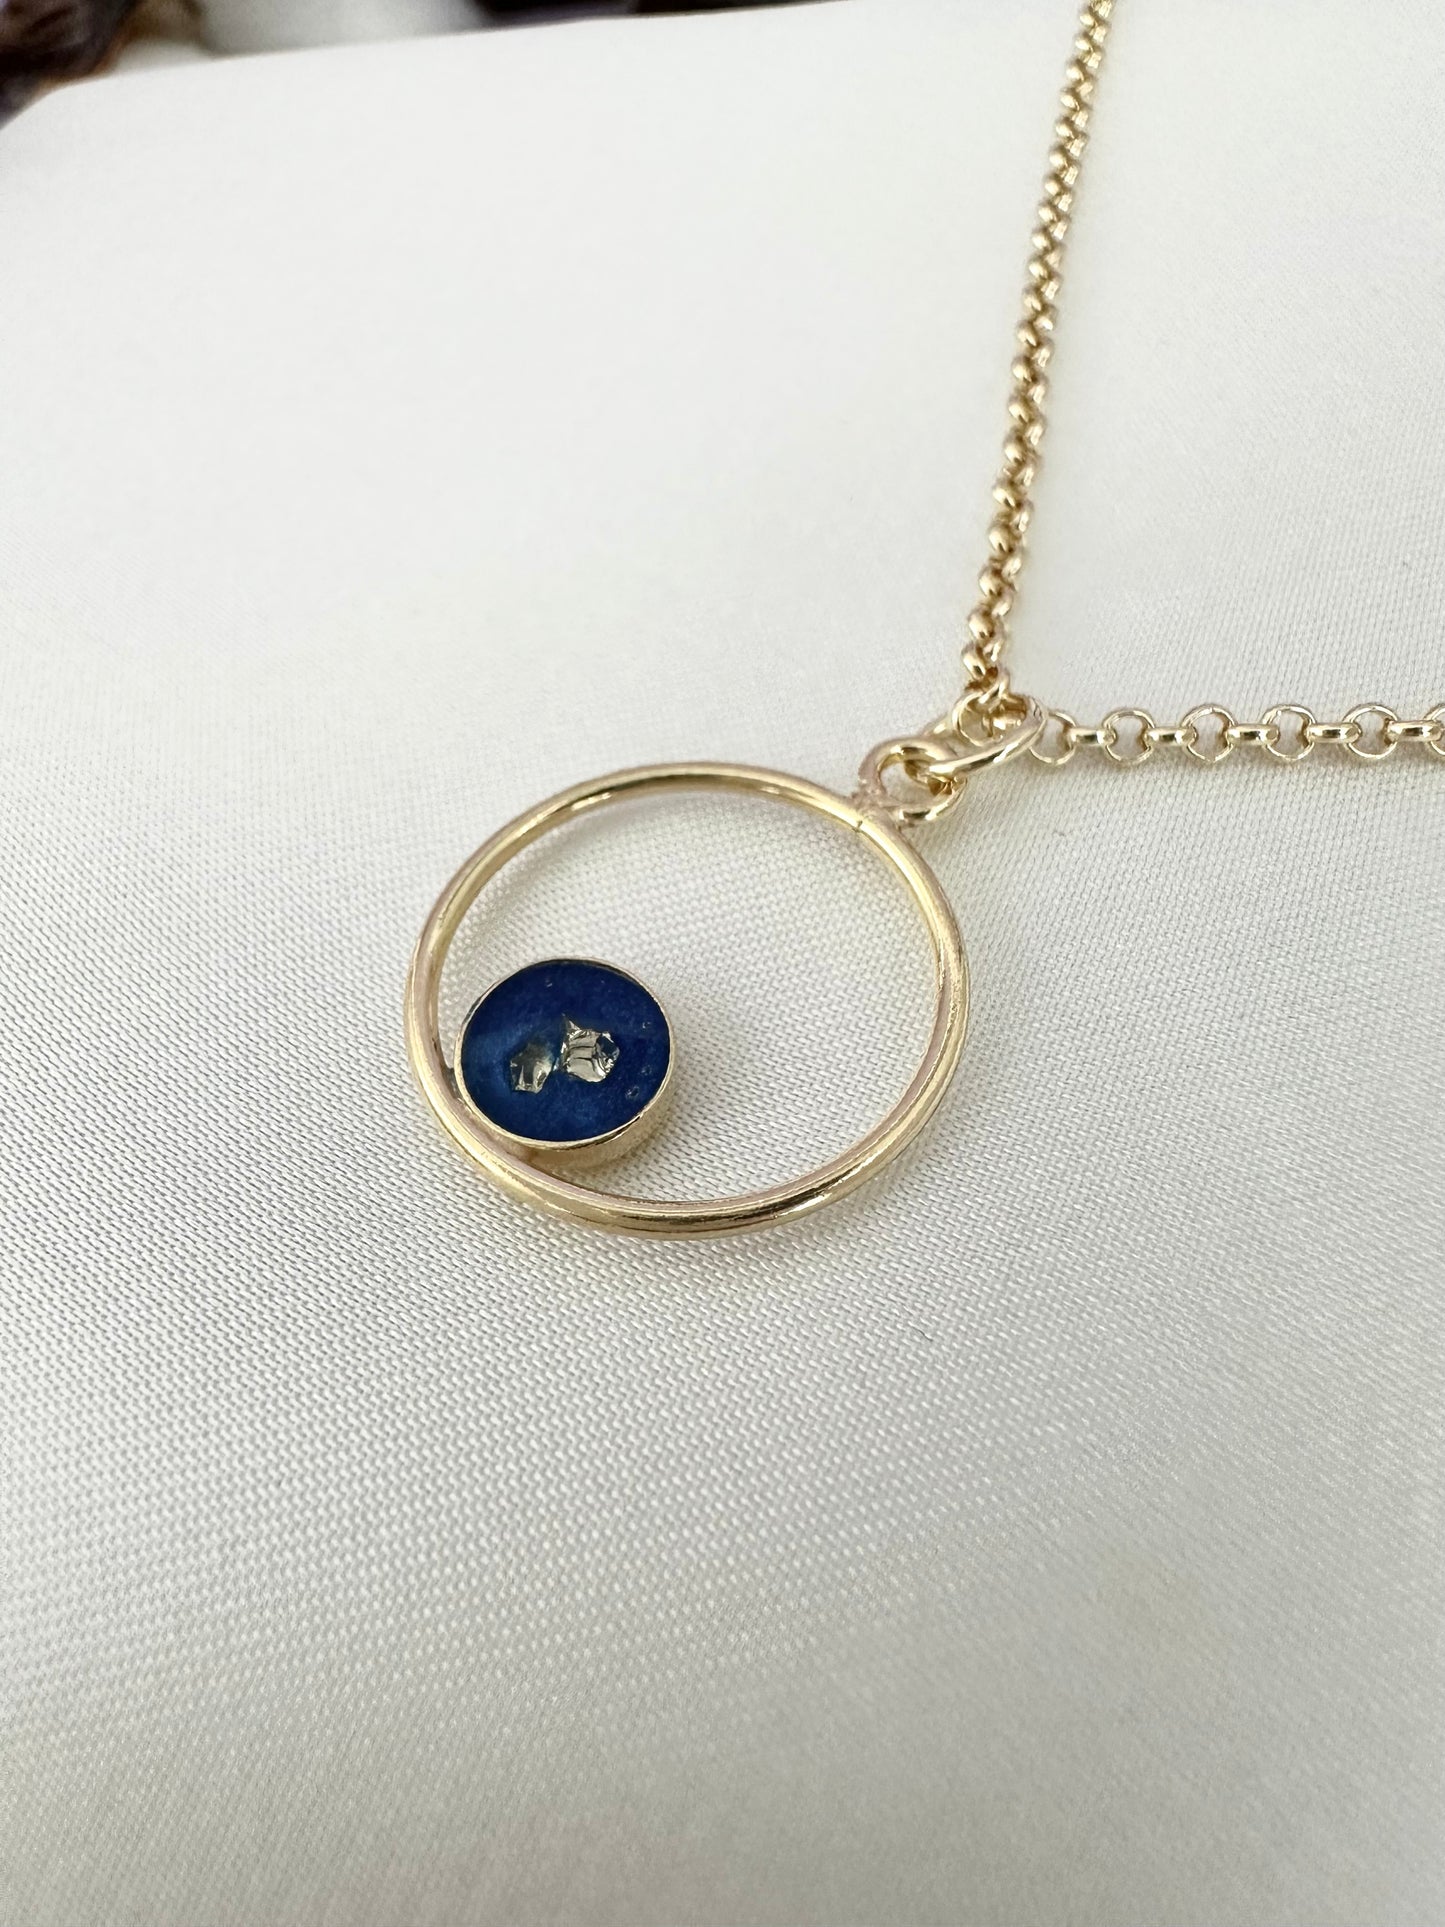 Necklace with blue pendant and golden stones